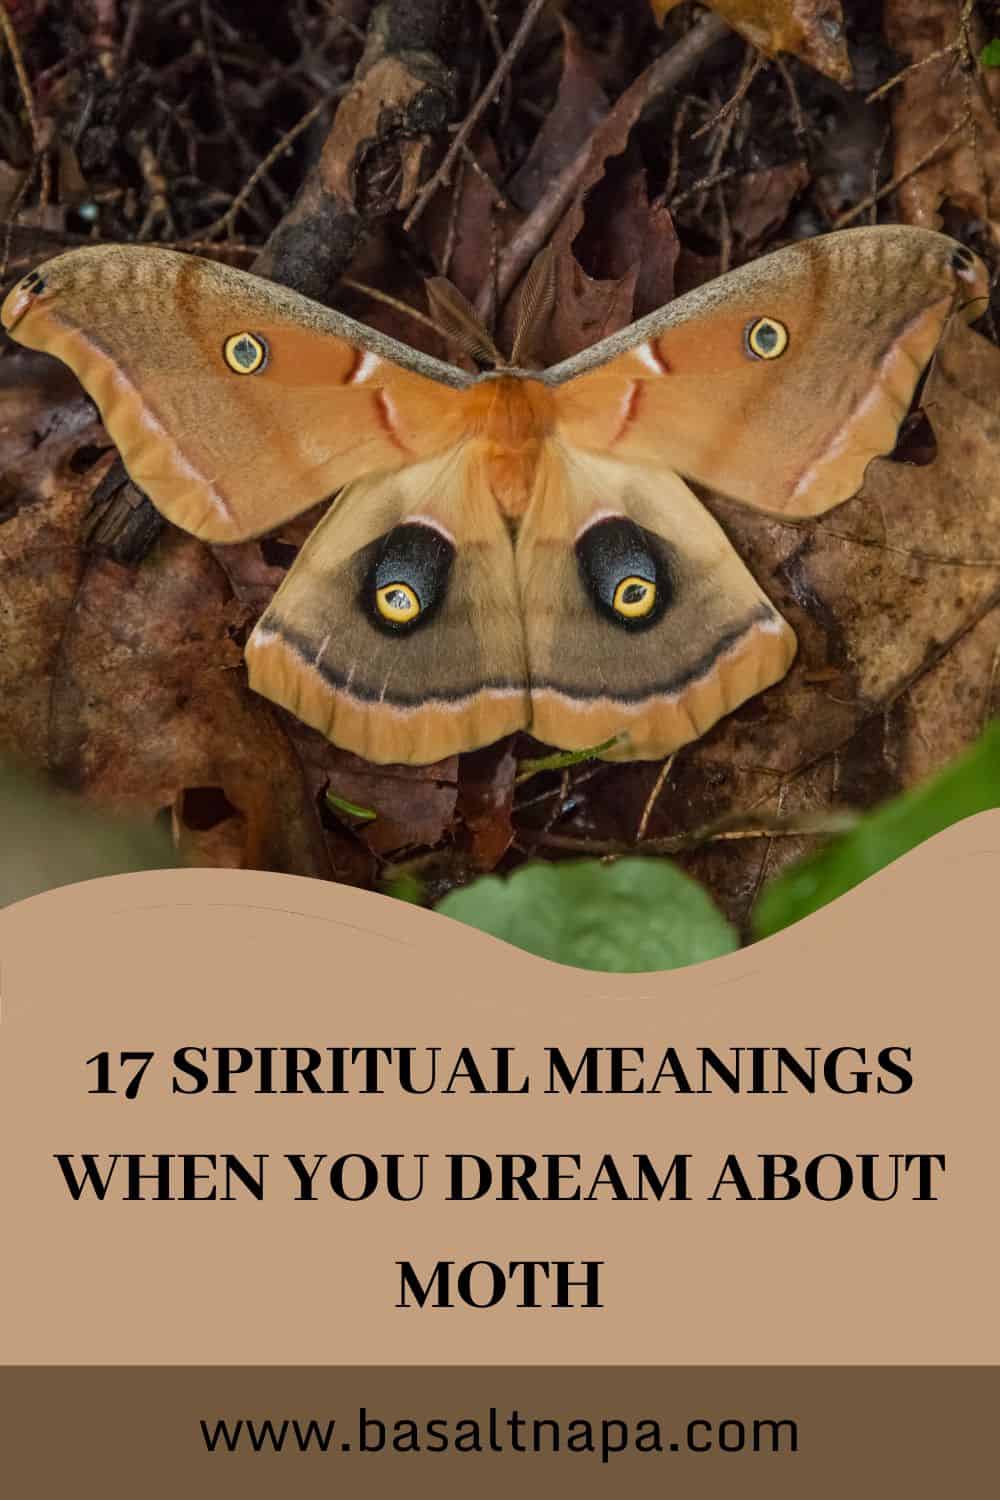 17 Spiritual Meanings When You Dream About Moth